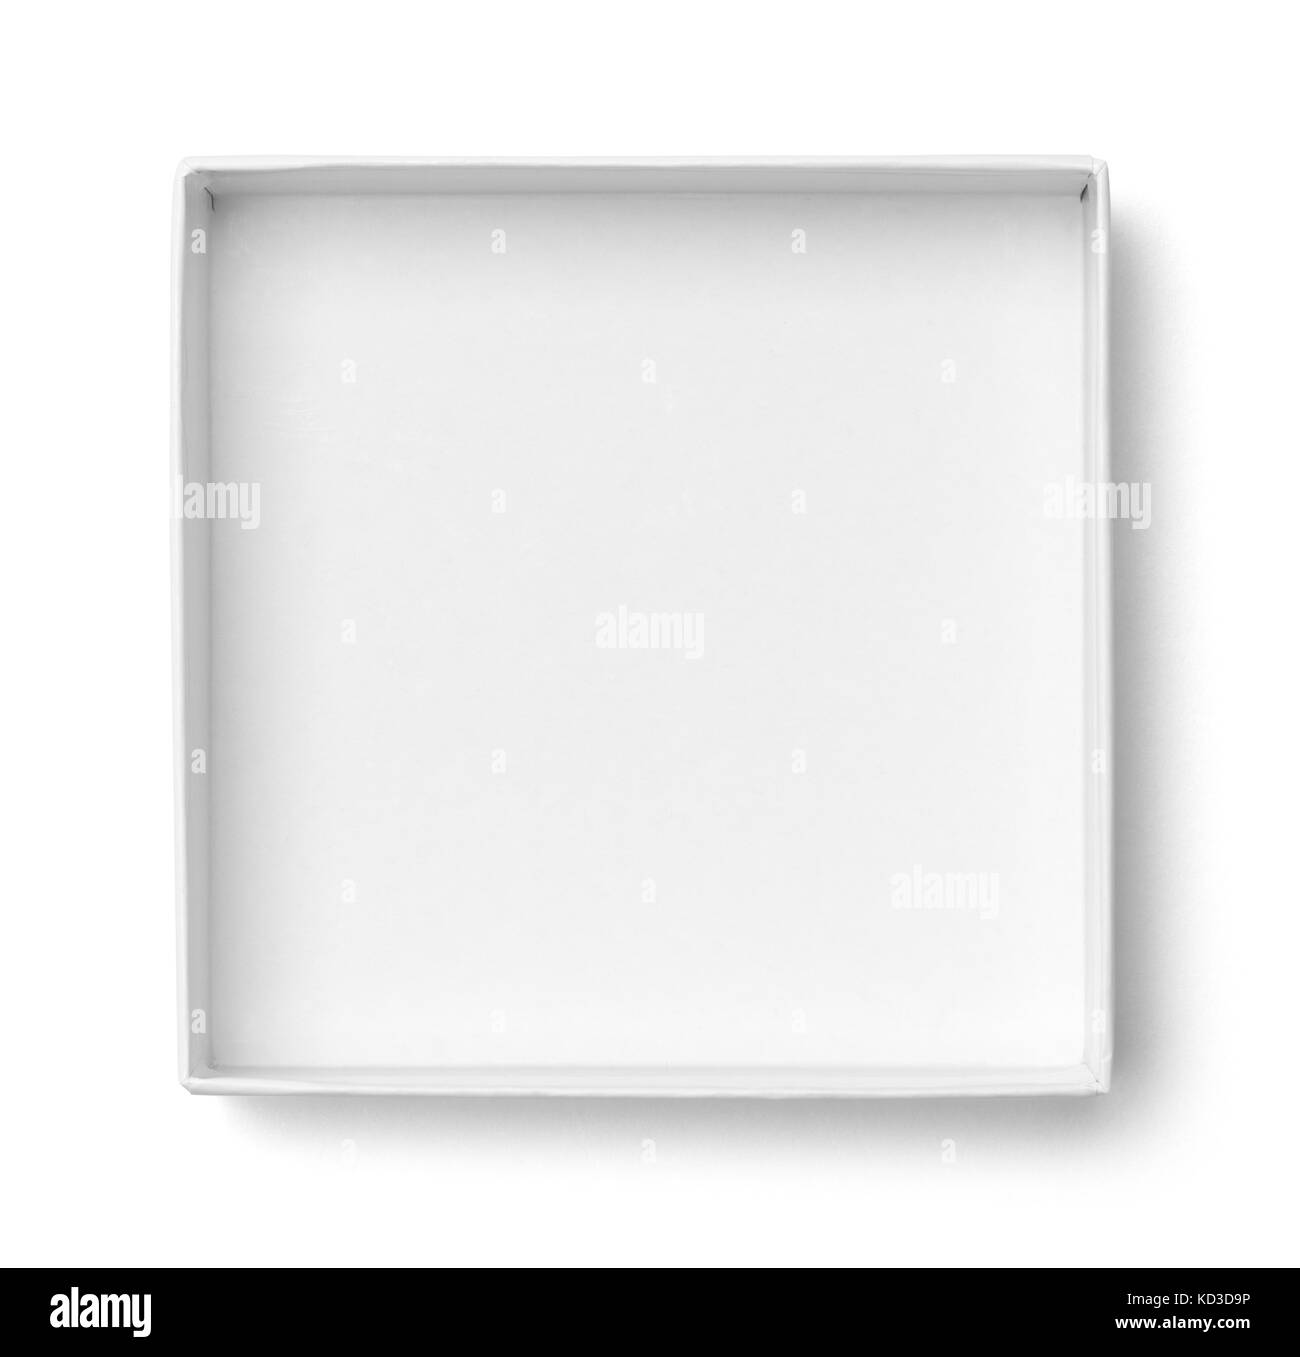 White Open Gift Box Isolated on a White Background. Stock Photo